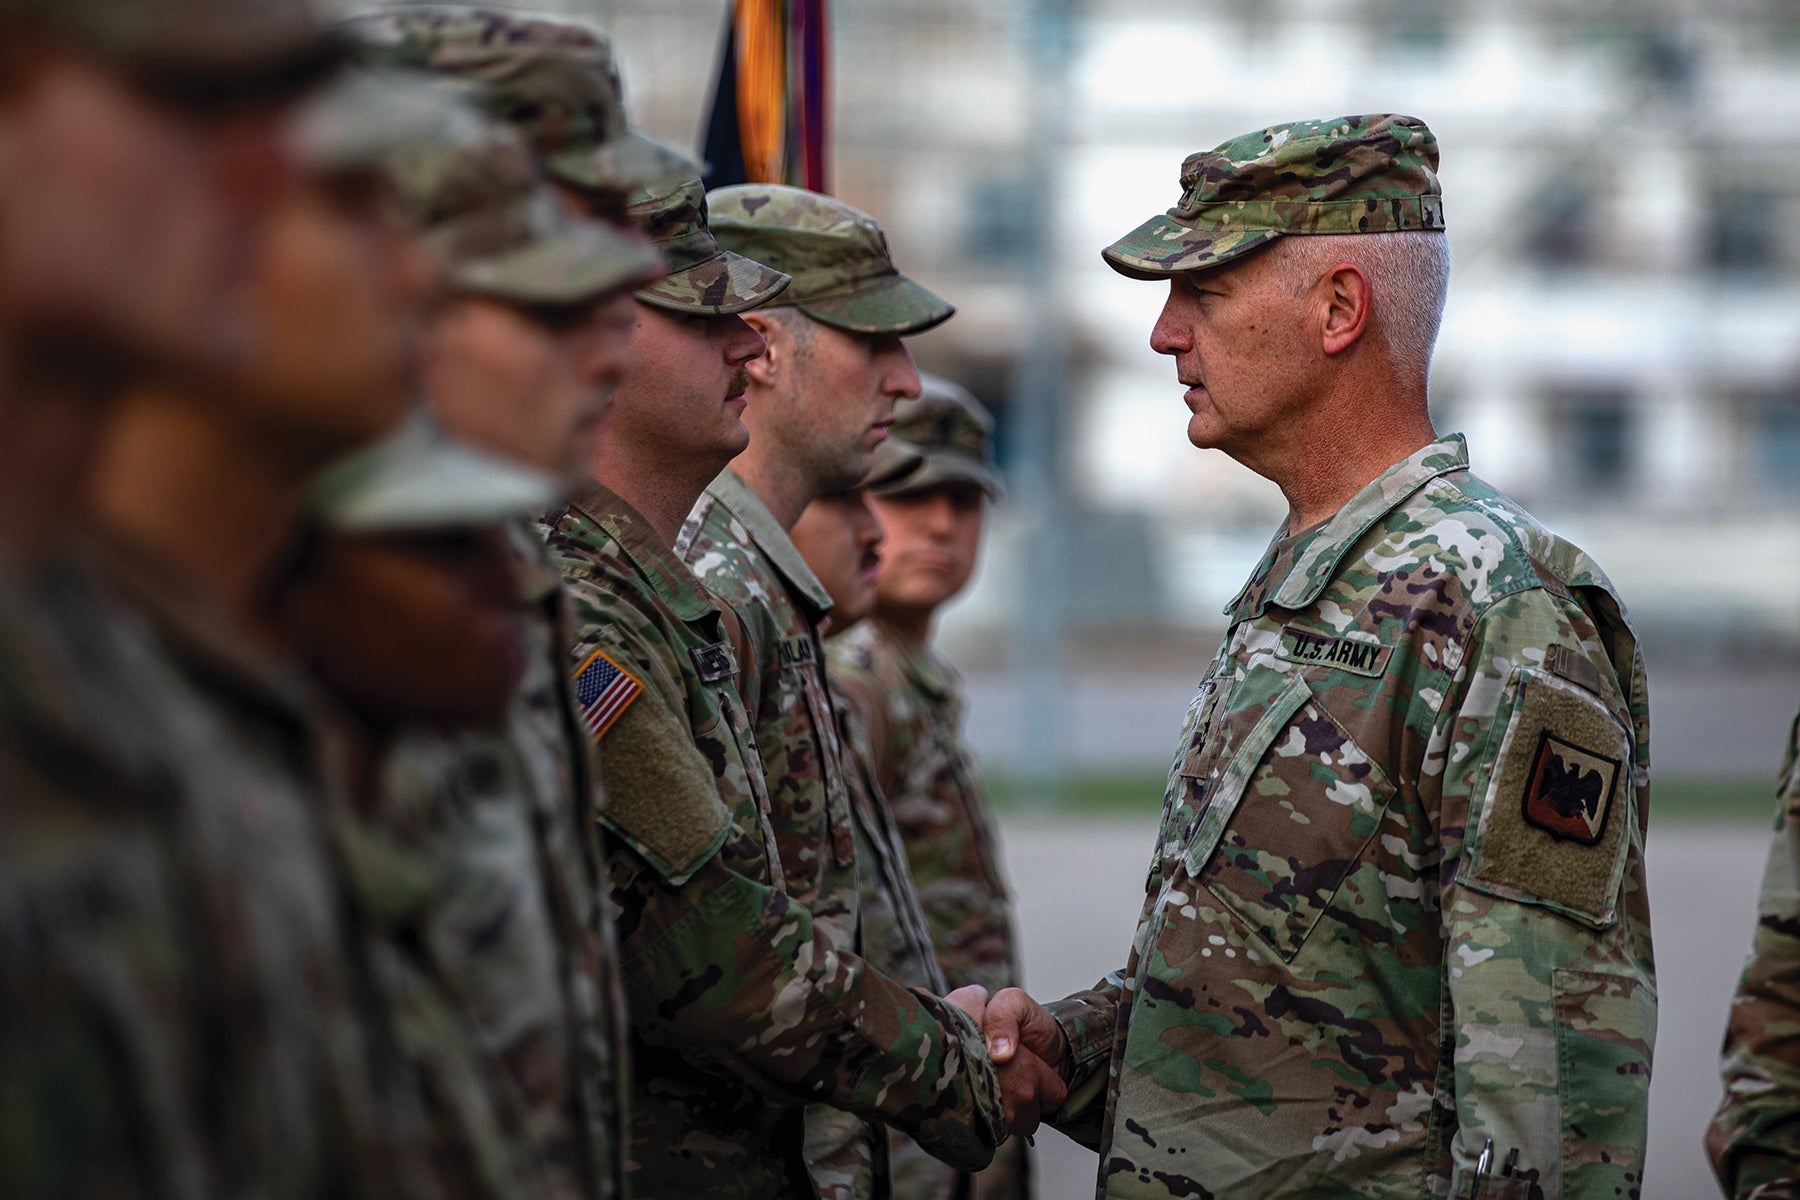 Lt. Gen. Jon Jensen, right, director of the Army National Guard, presents awards for outstanding service to soldiers with the Washington Army National Guard’s 3rd Battalion, 161st Infantry Regiment, at Bemowo Piskie Training Area, Poland. (Credit: U.S. Army/Spc. Osvaldo Fuentes)